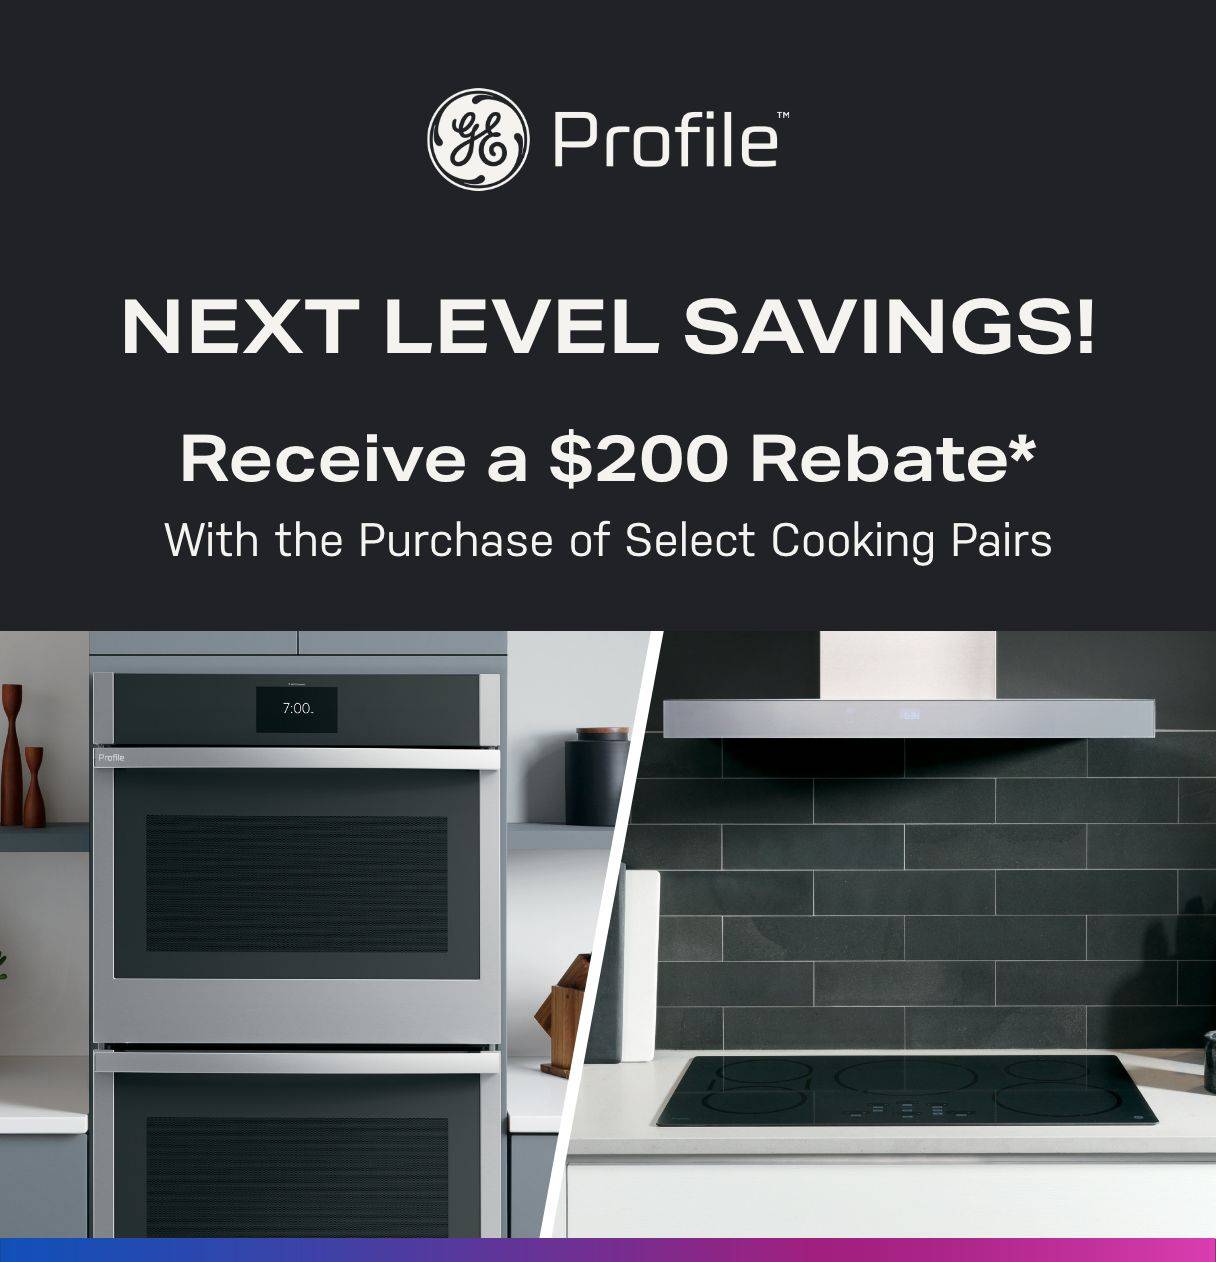 Next Level Savings - Receive a $200 Rebate with the purchase of select cooking pairs